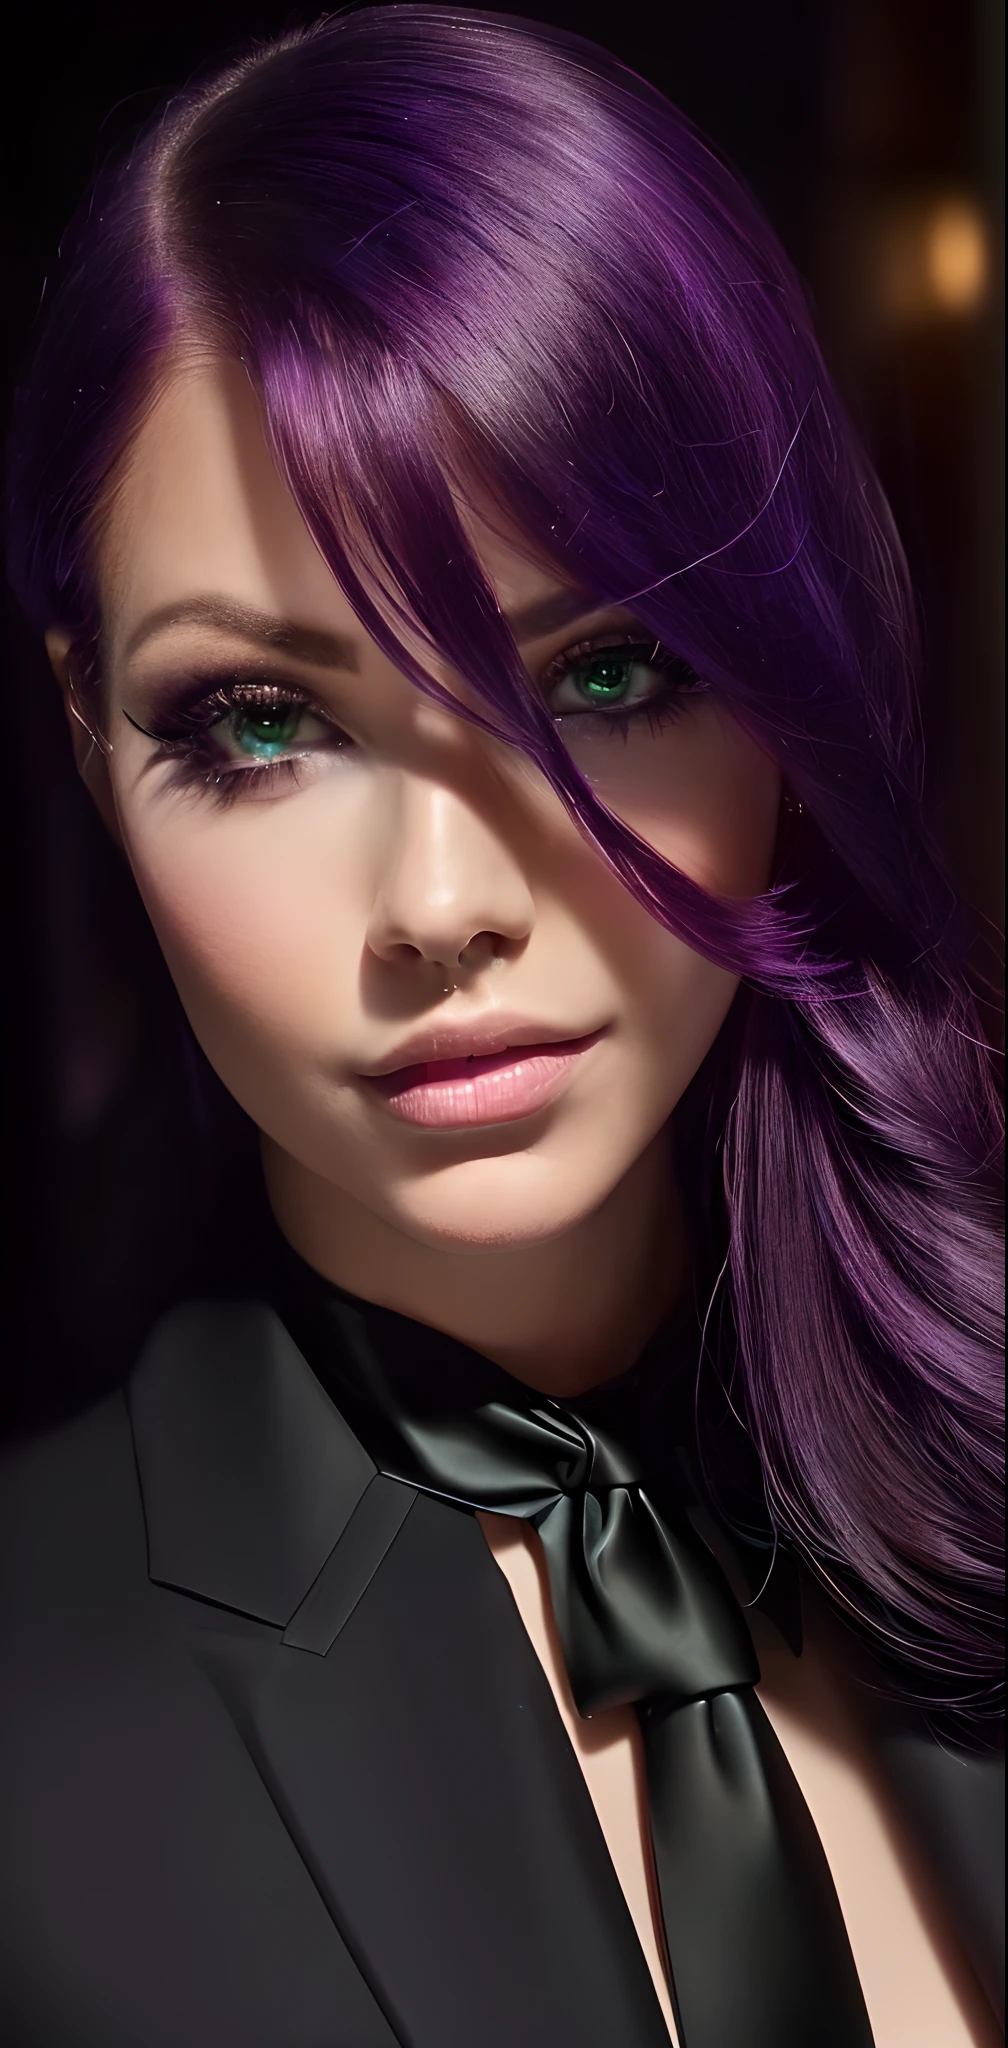 a close up of a model woman with purple hair and a ((black tie)), portrait space cadet girl, portrait knights of zodia woman, close up of a model woman, , with glowing green eyes,